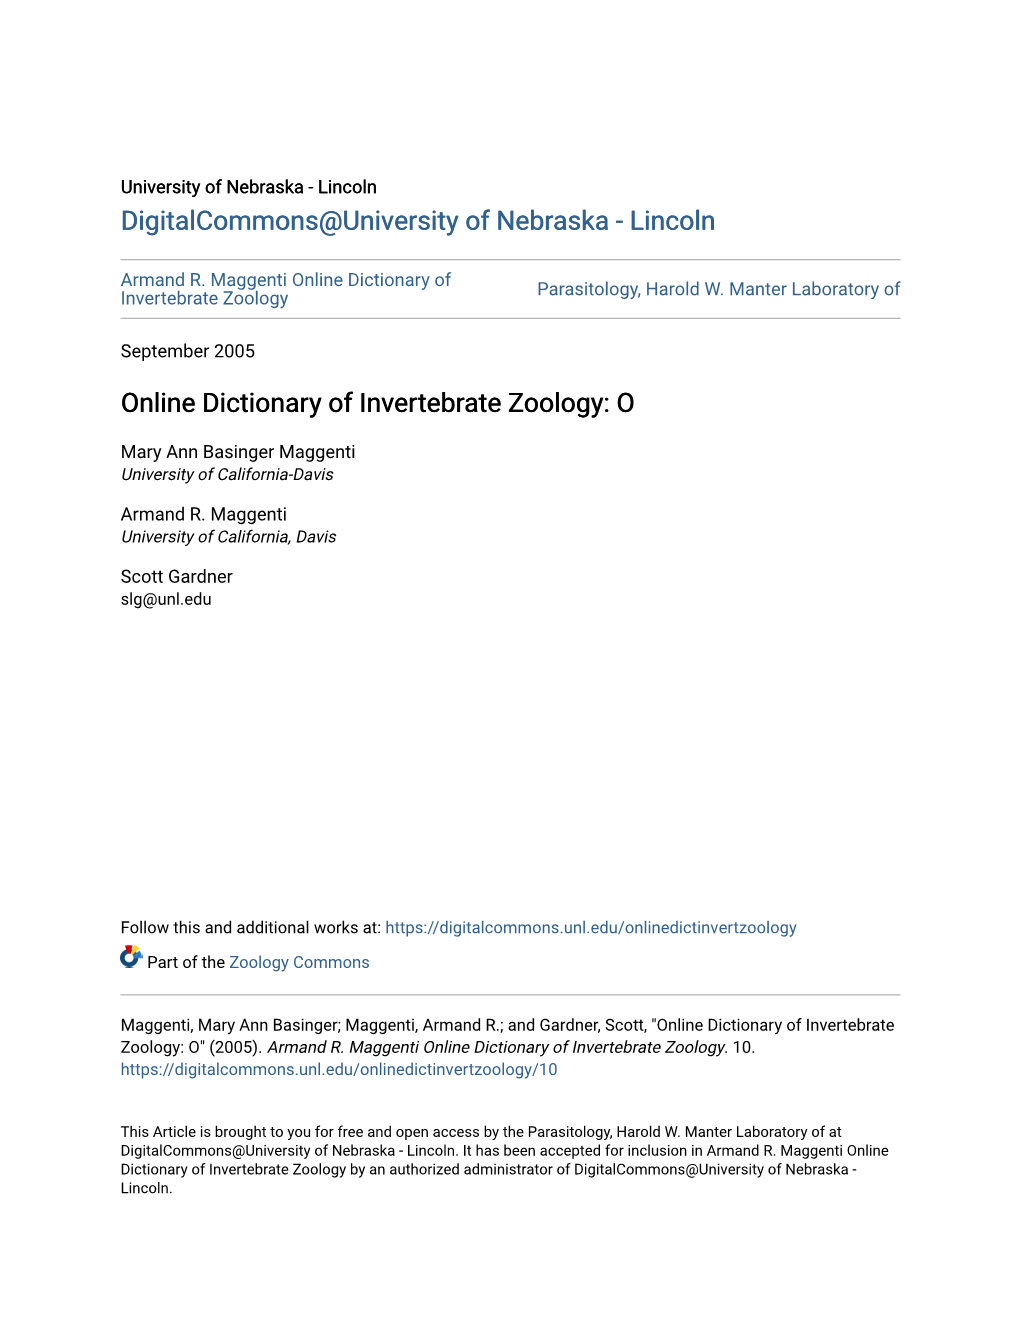 Online Dictionary of Invertebrate Zoology: O